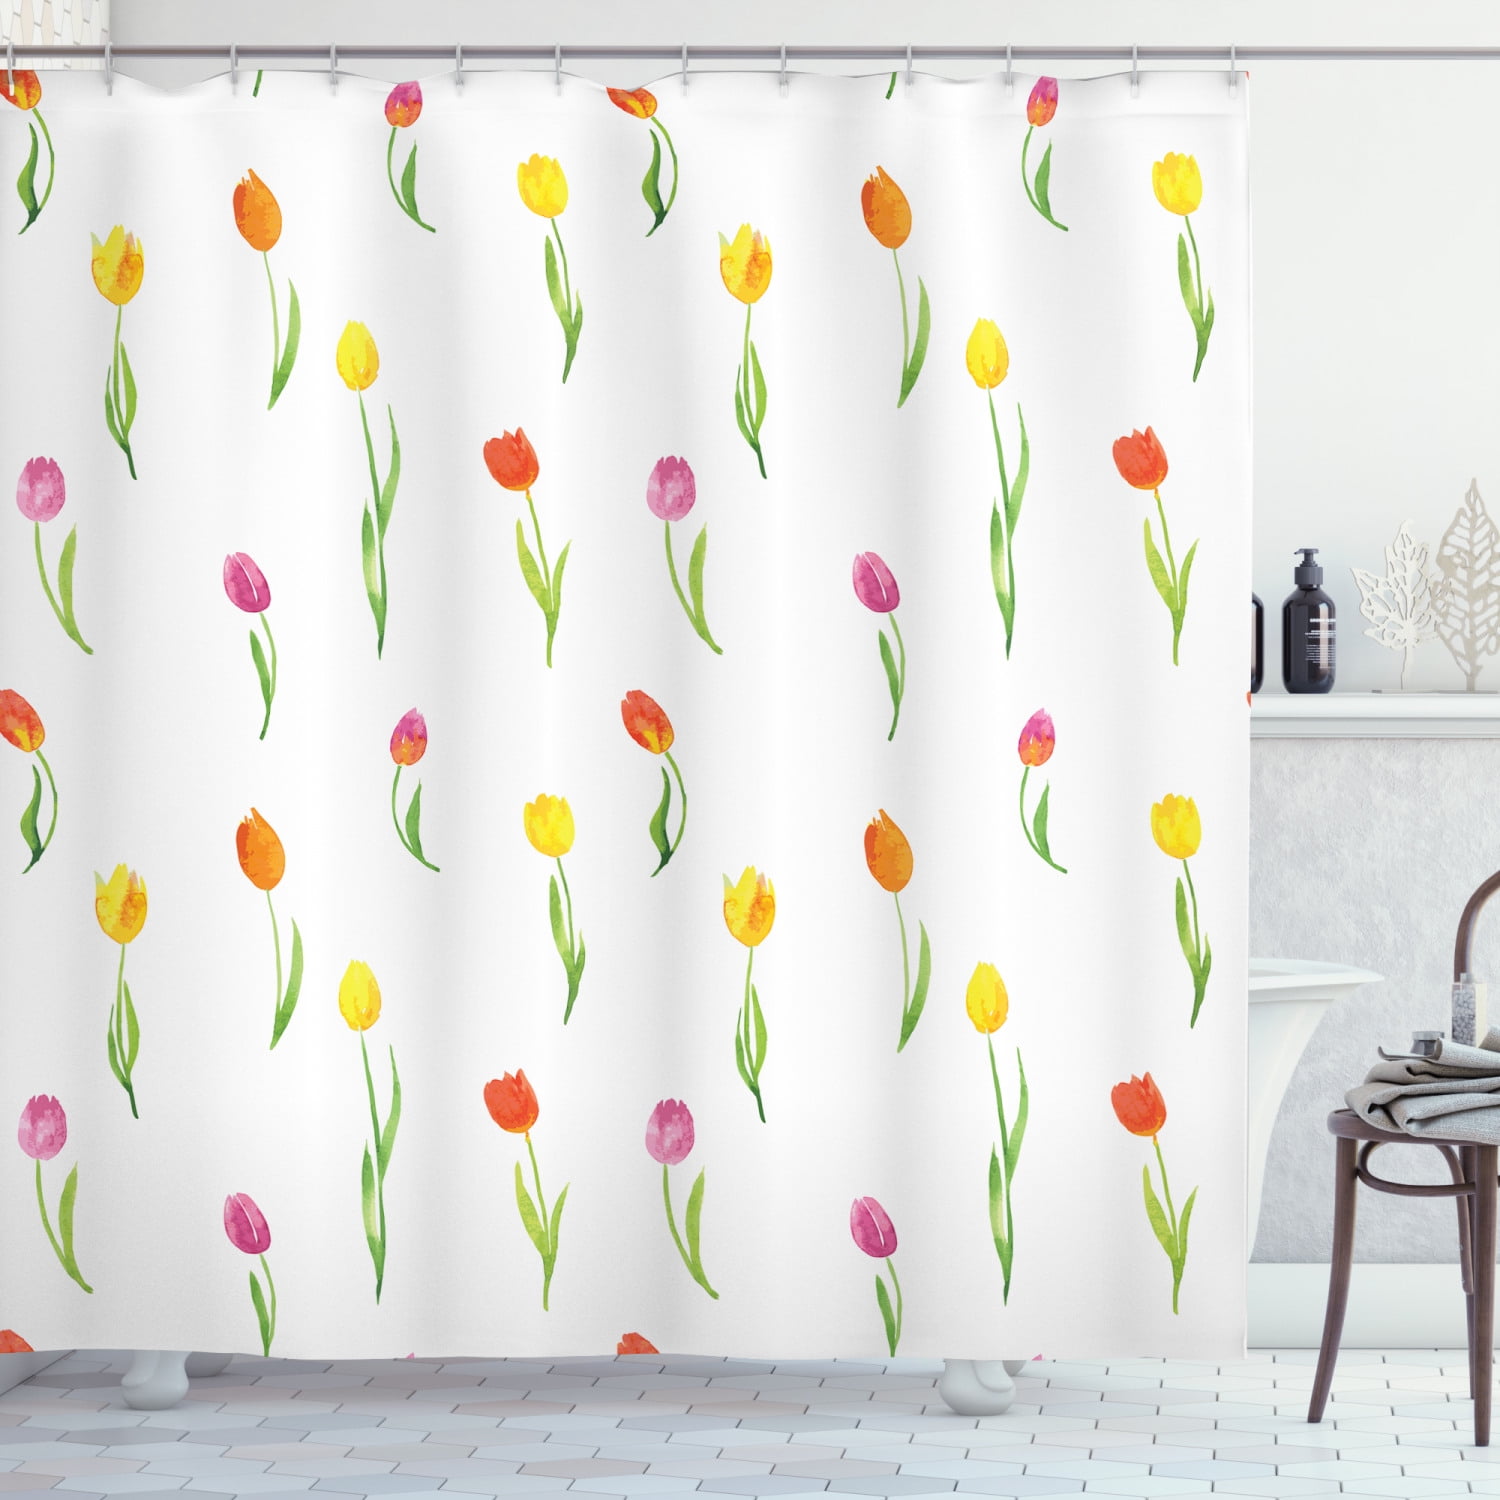 Details about   Spring Colored Floral Shower Curtain Bathroom Decor Fabric 12 HOOKS 